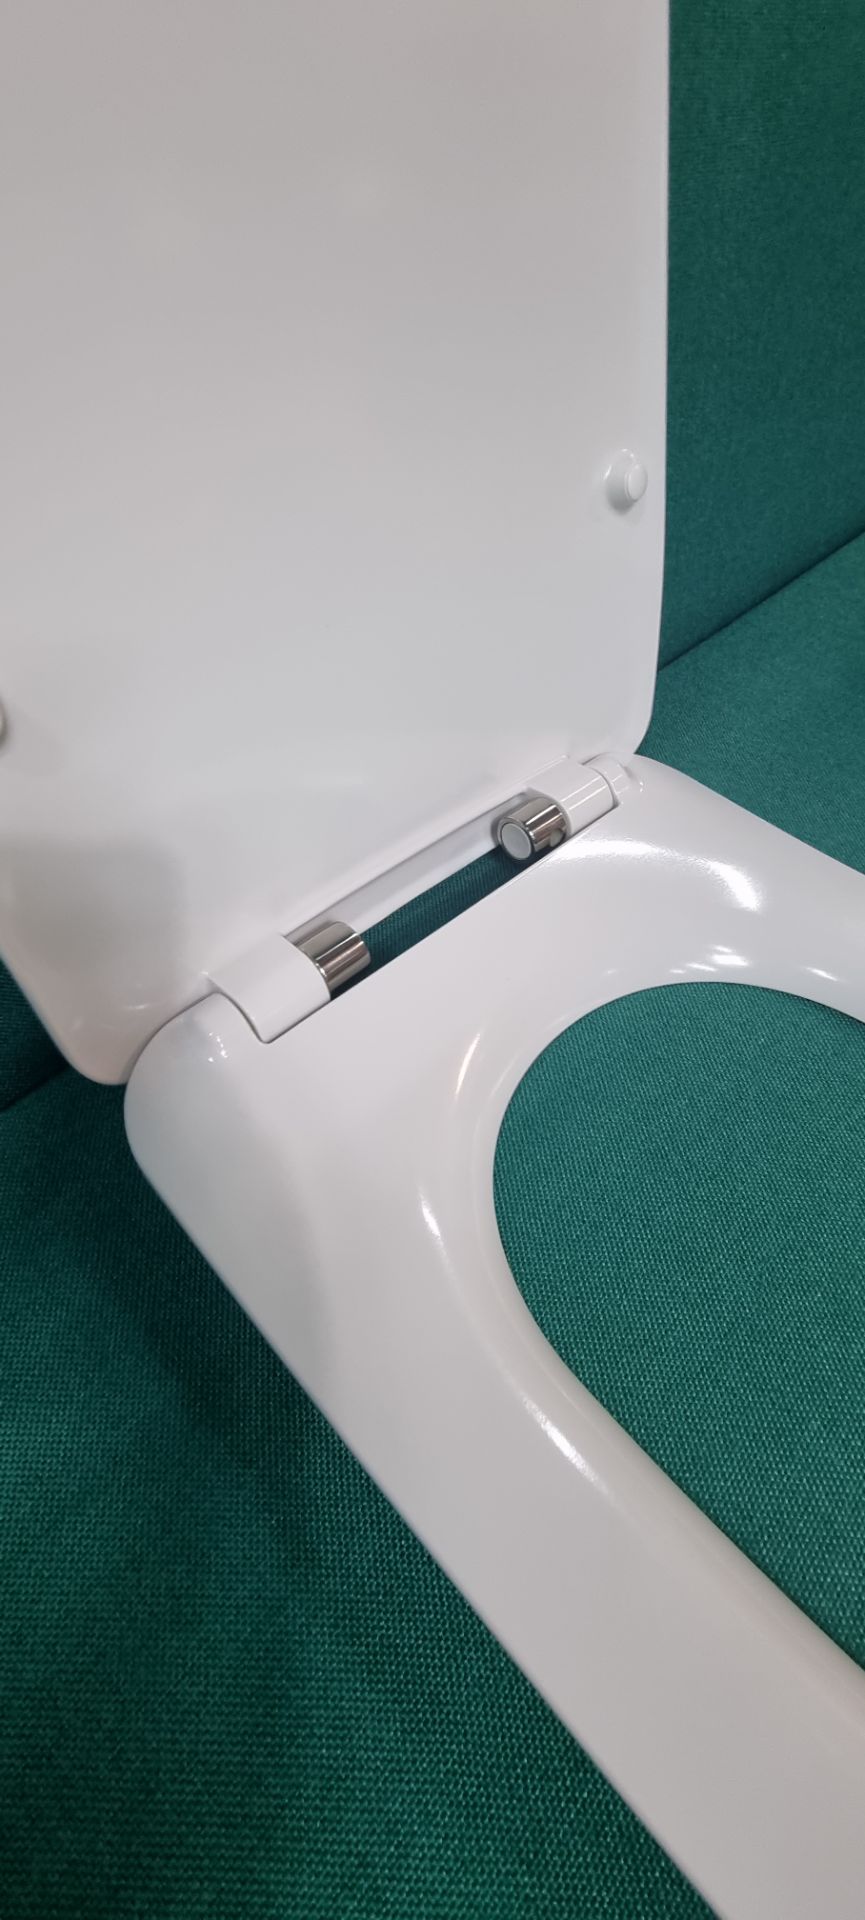 Ex-Display Liberty Duraplast S10150 Soft Close Quick Release Toilet Seat White - Image 4 of 7